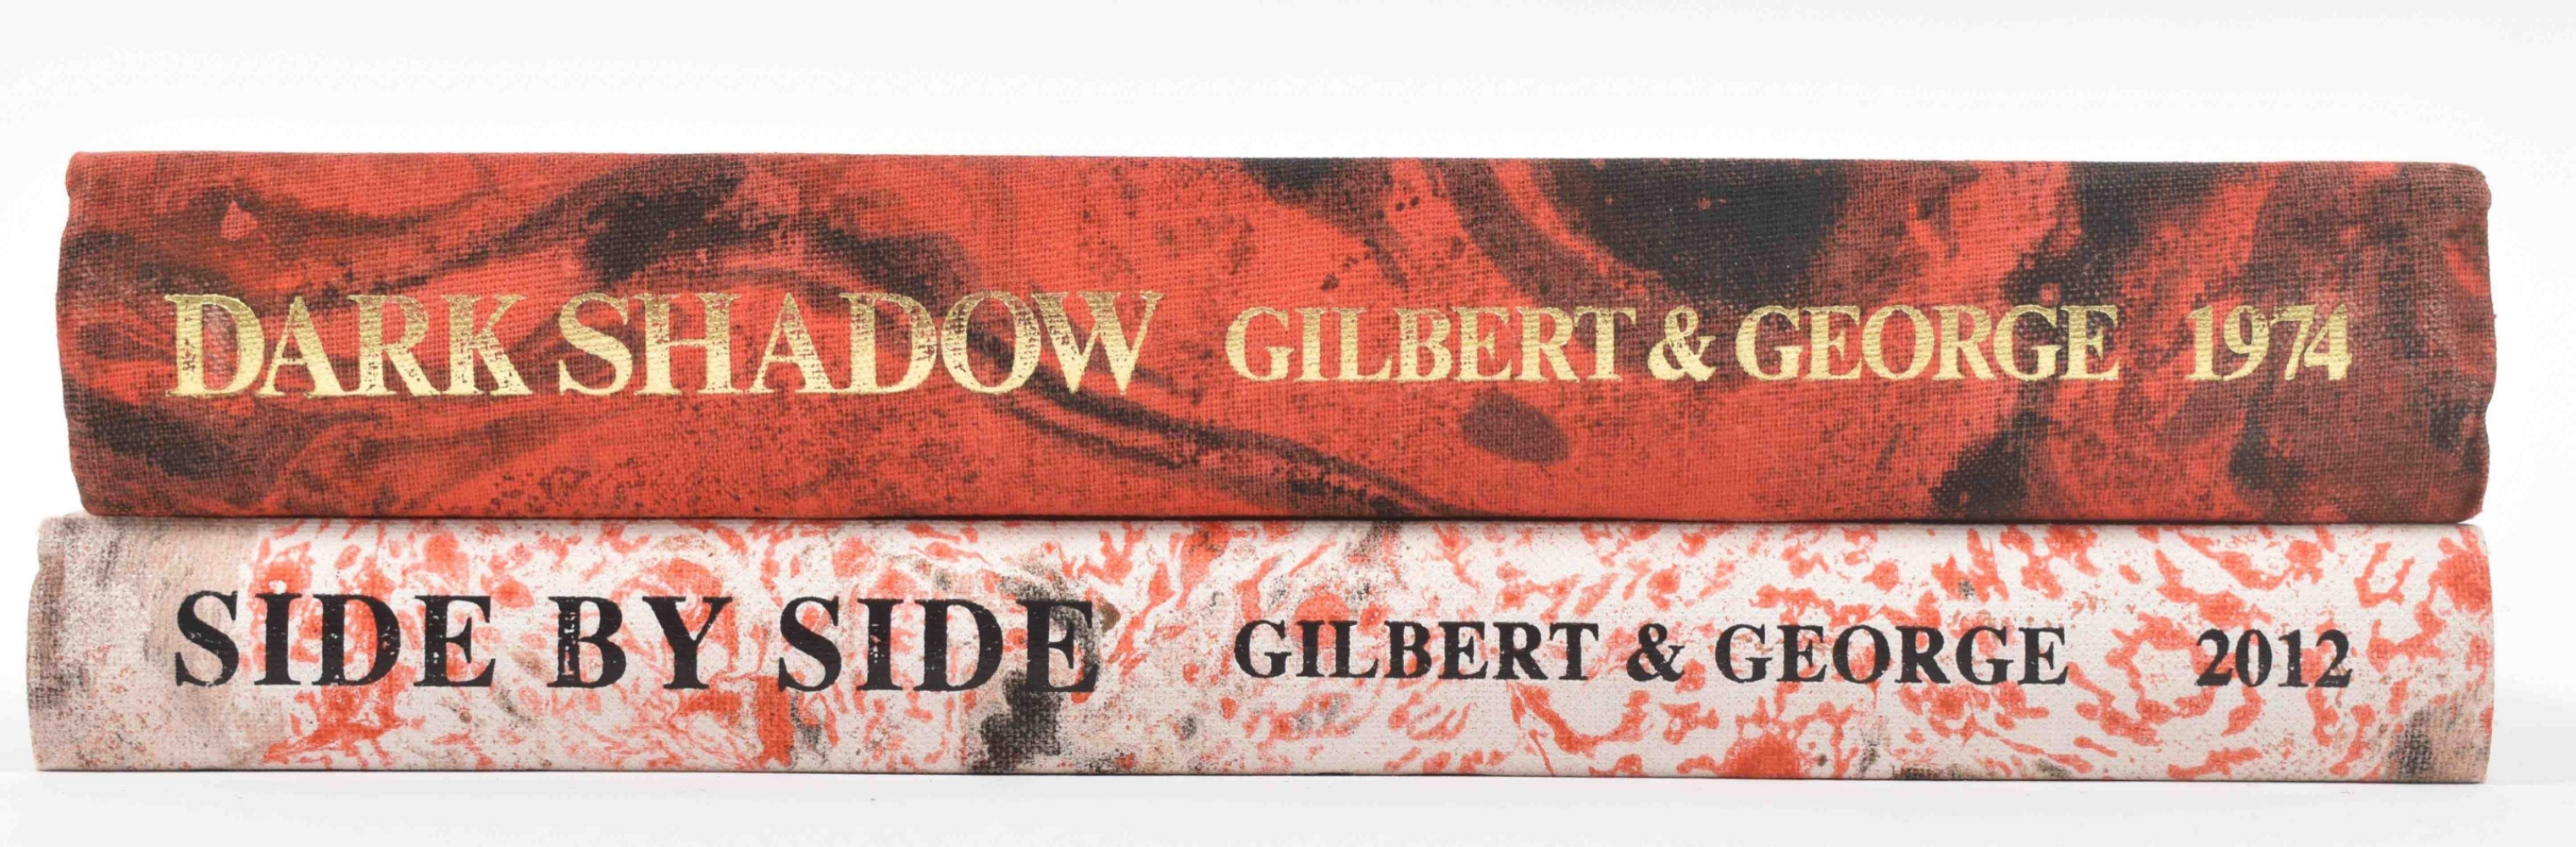 Gilbert & George: Dark Shadow (1974) and Side by Side (1971/2012)